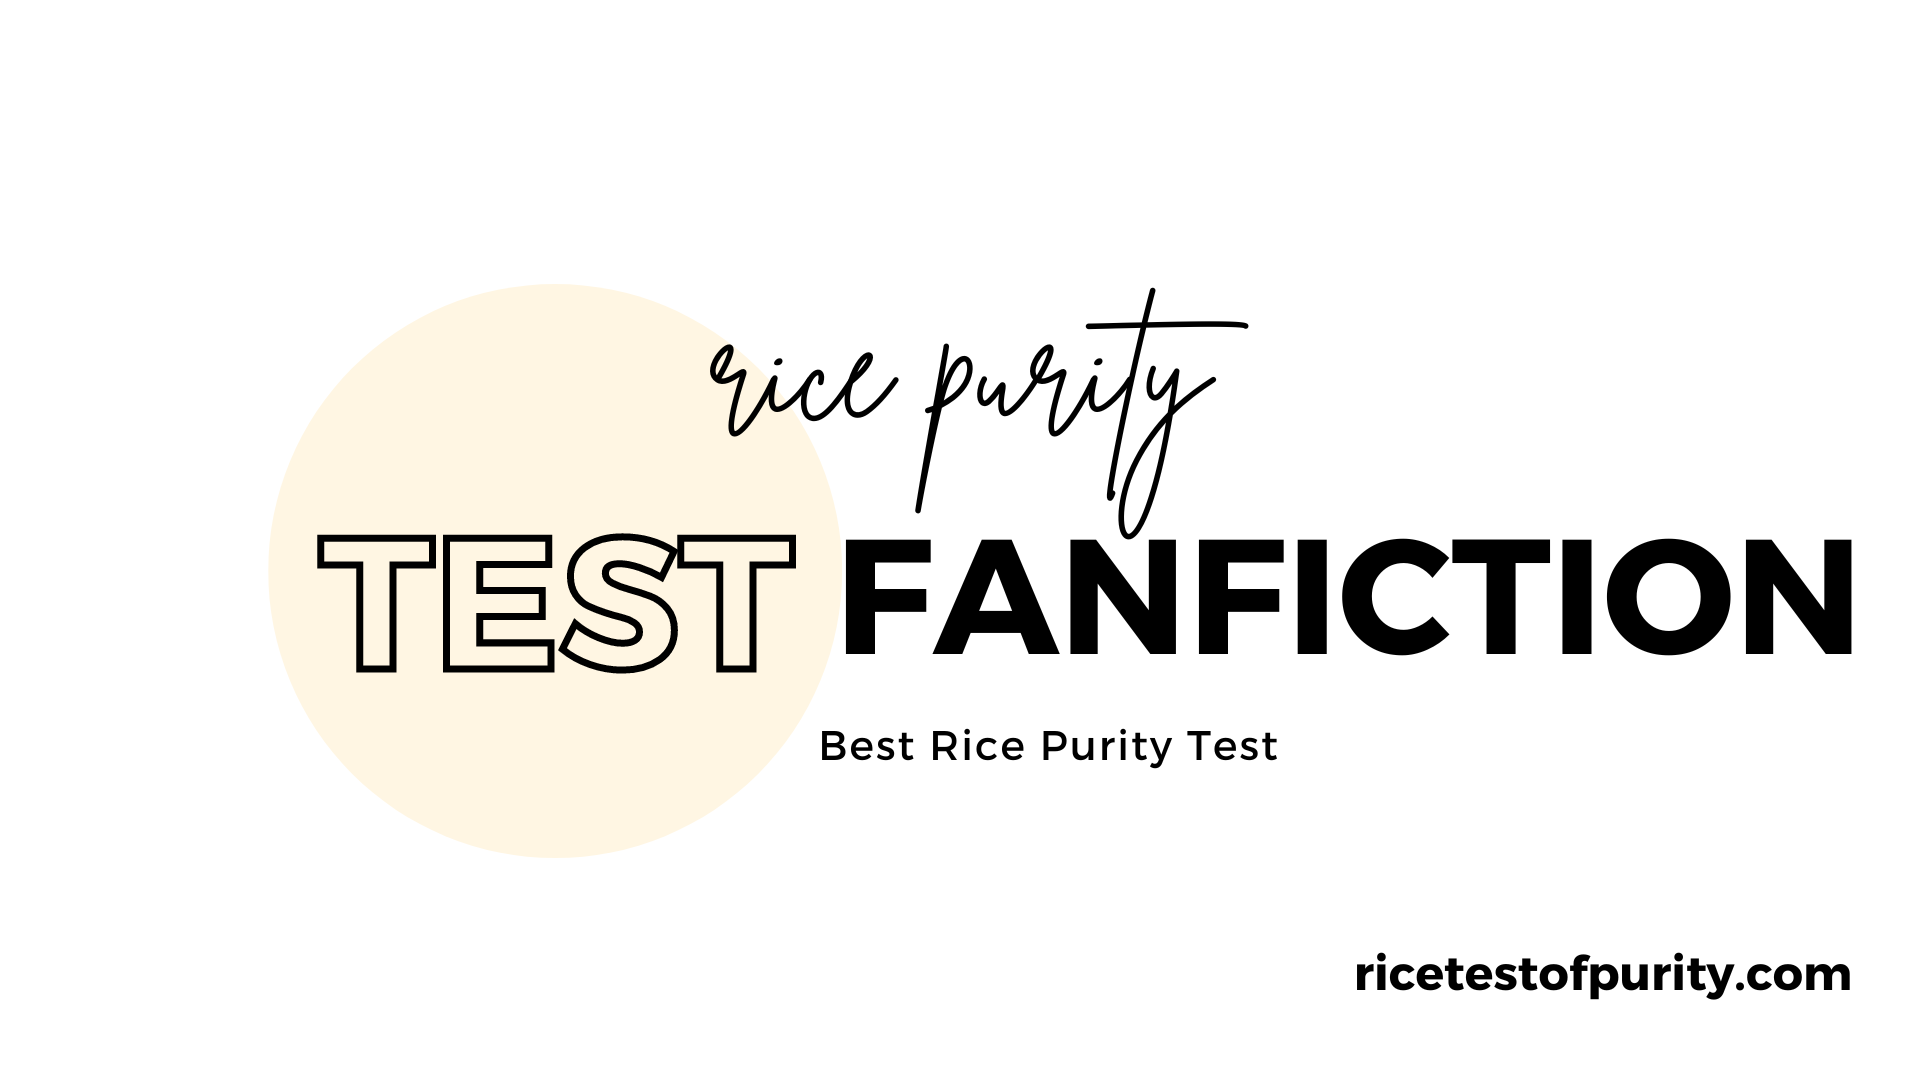 rice purity test fanfiction